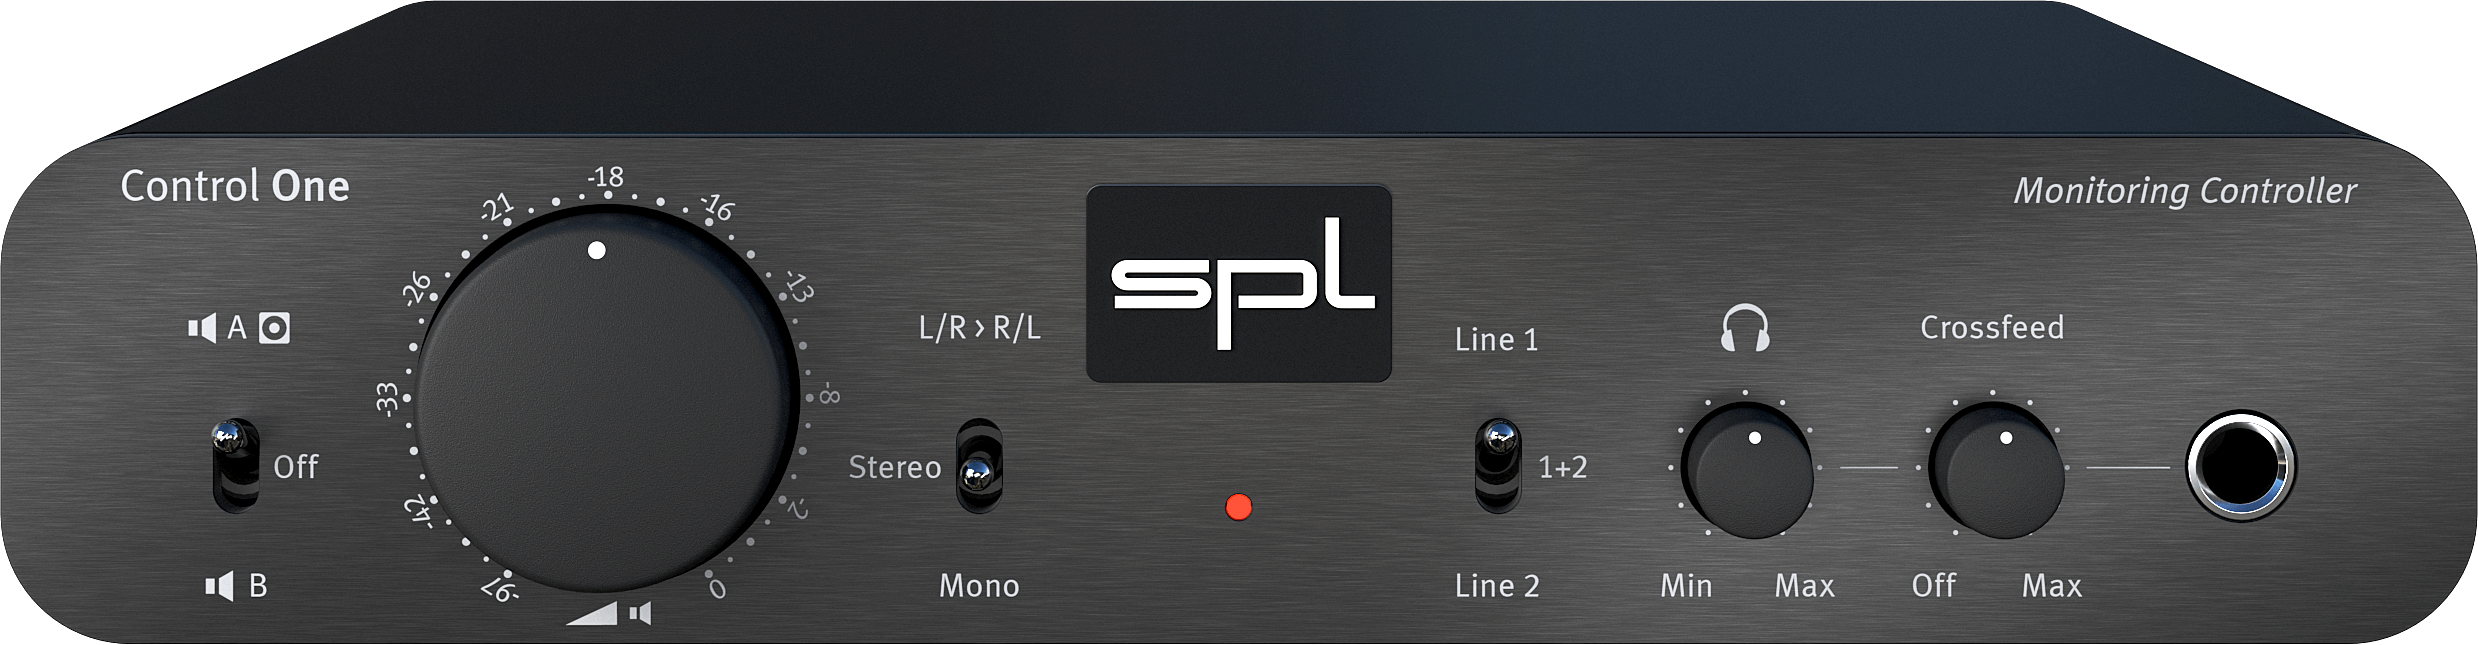 SPL Control One - The Monitor Controller